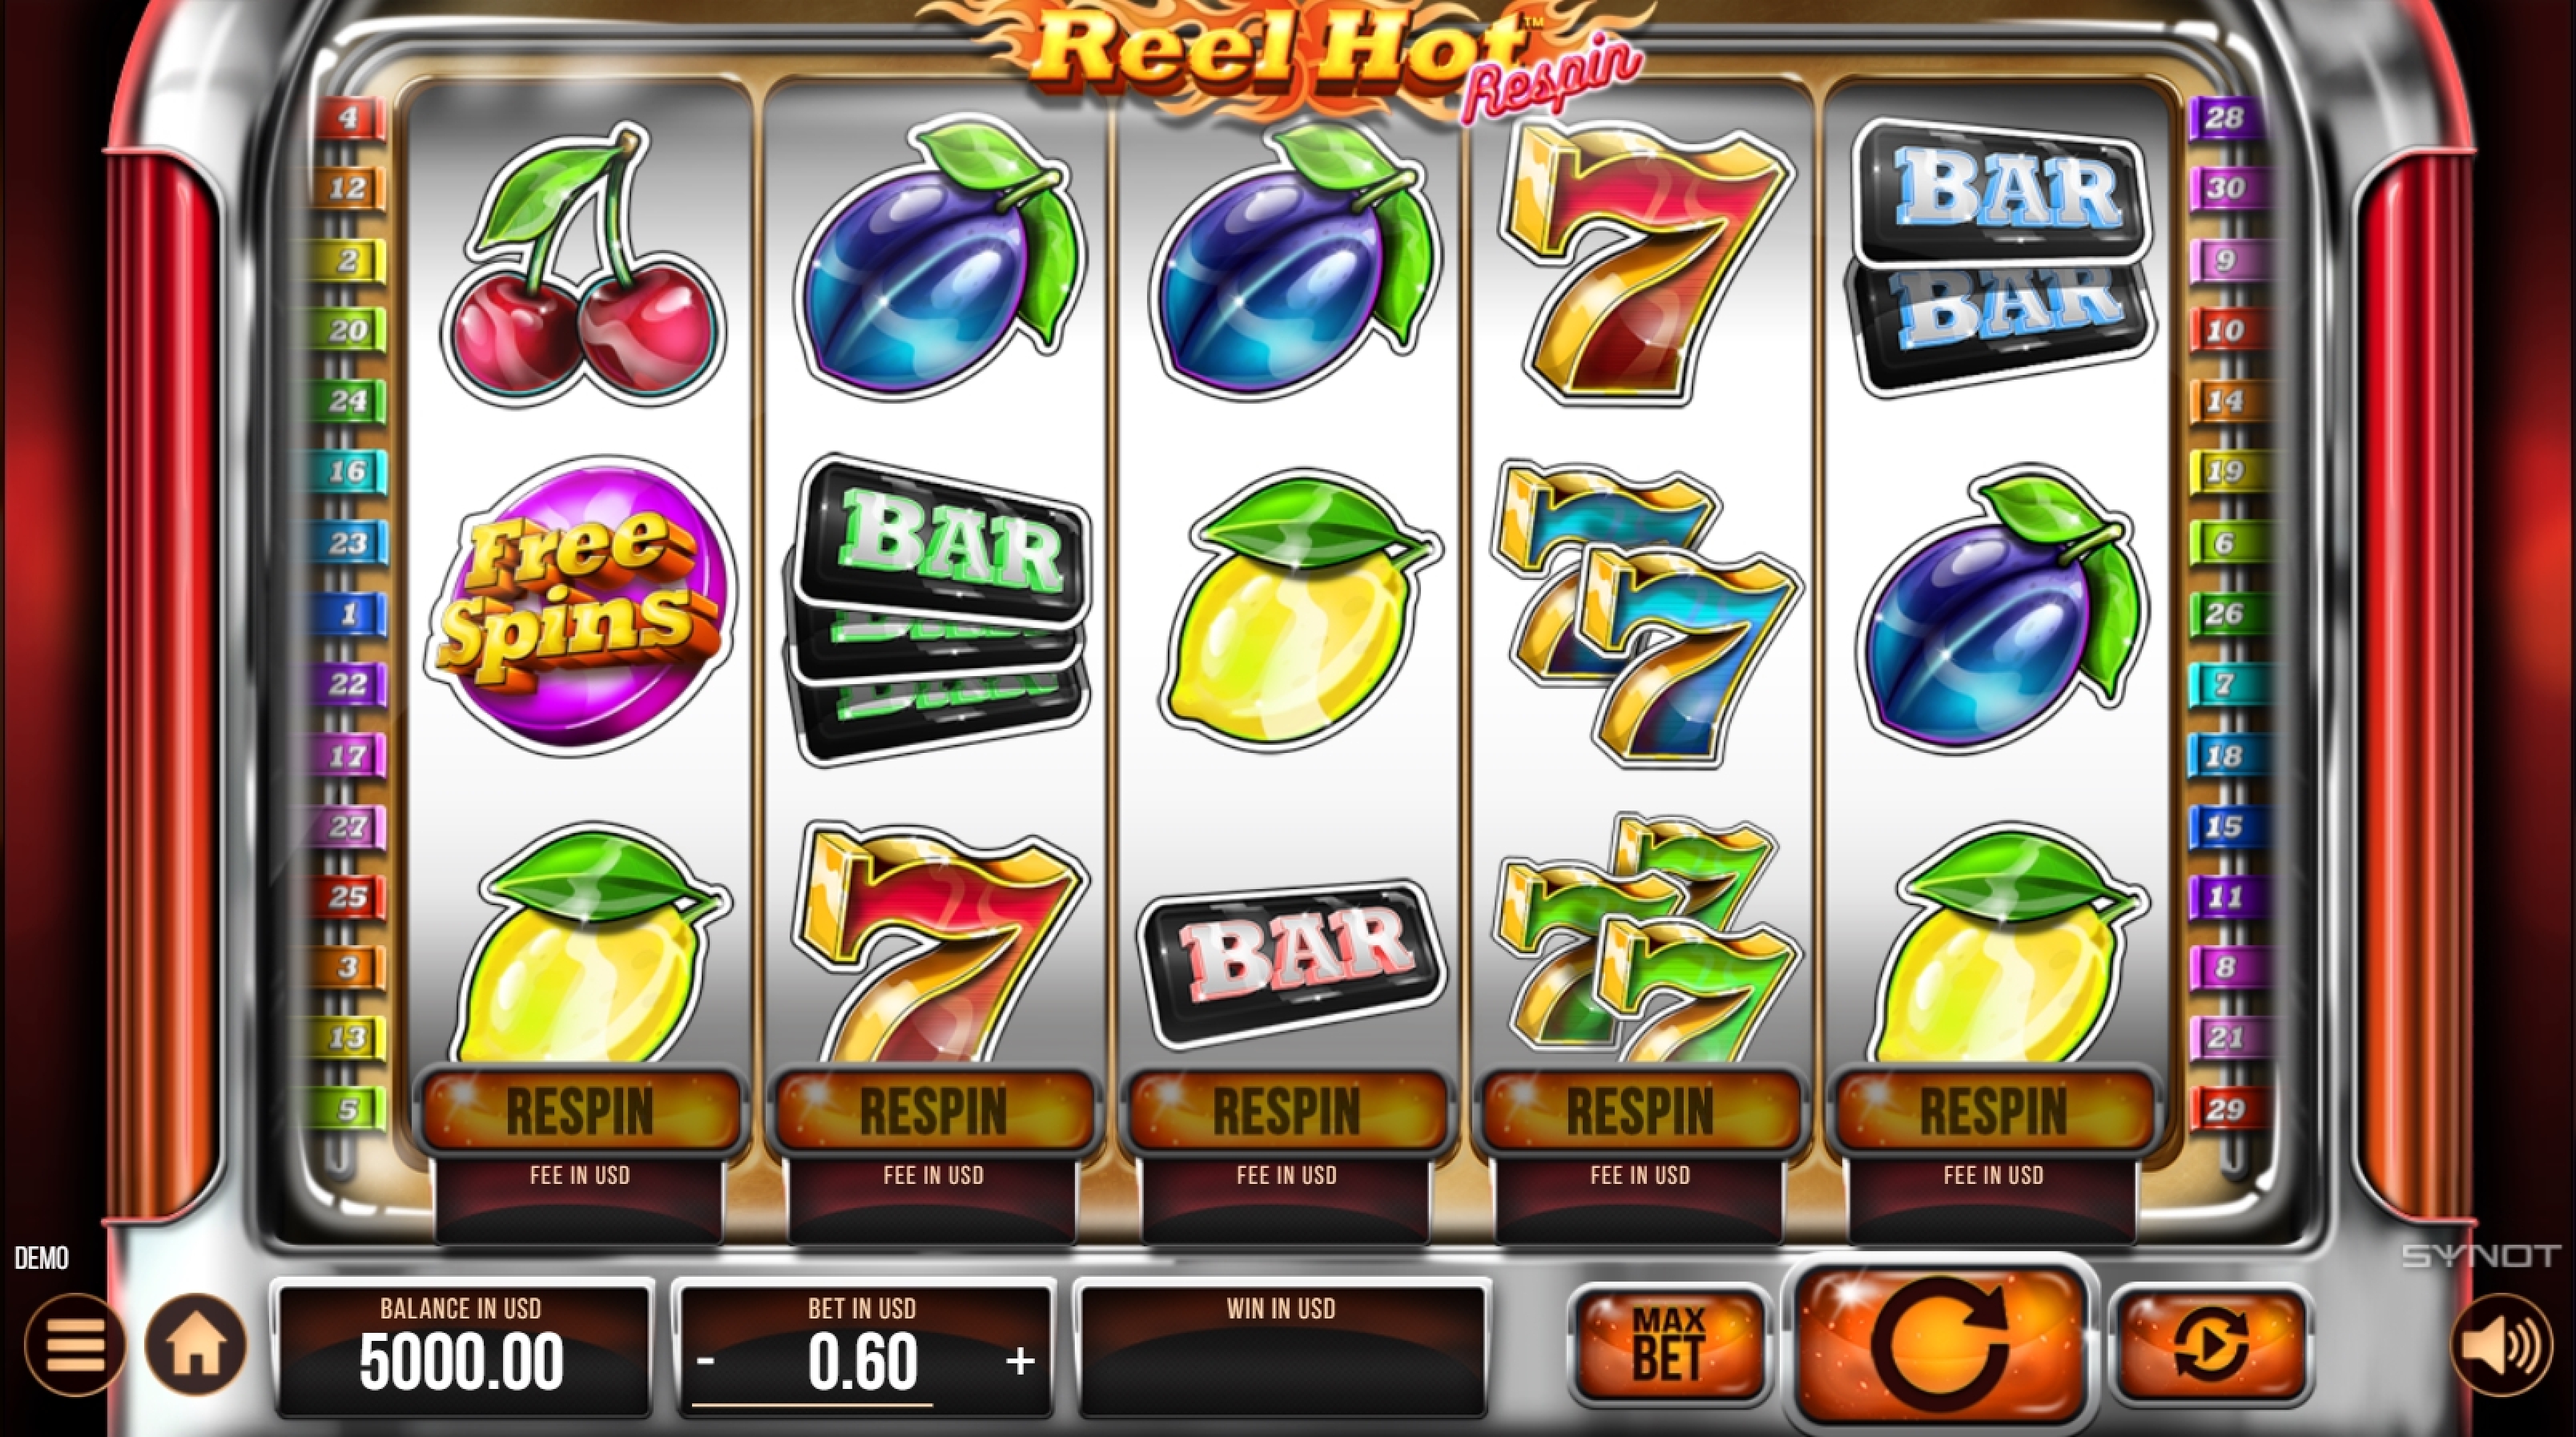 Reels in Reel Hot Respin Slot Game by Synot Games